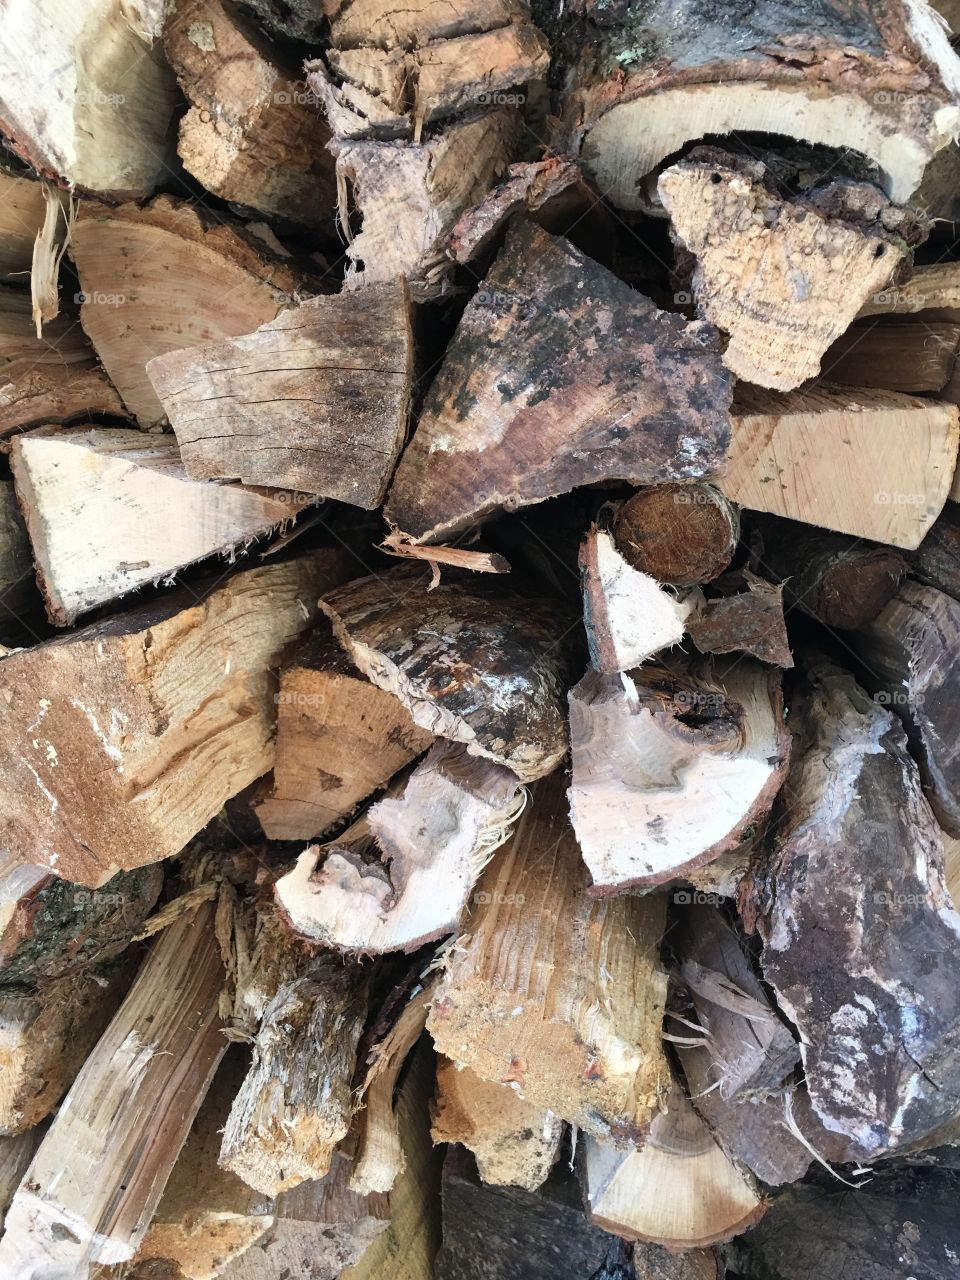 Wood stacked and ready for colder days"no rush" loving the spring like weather!